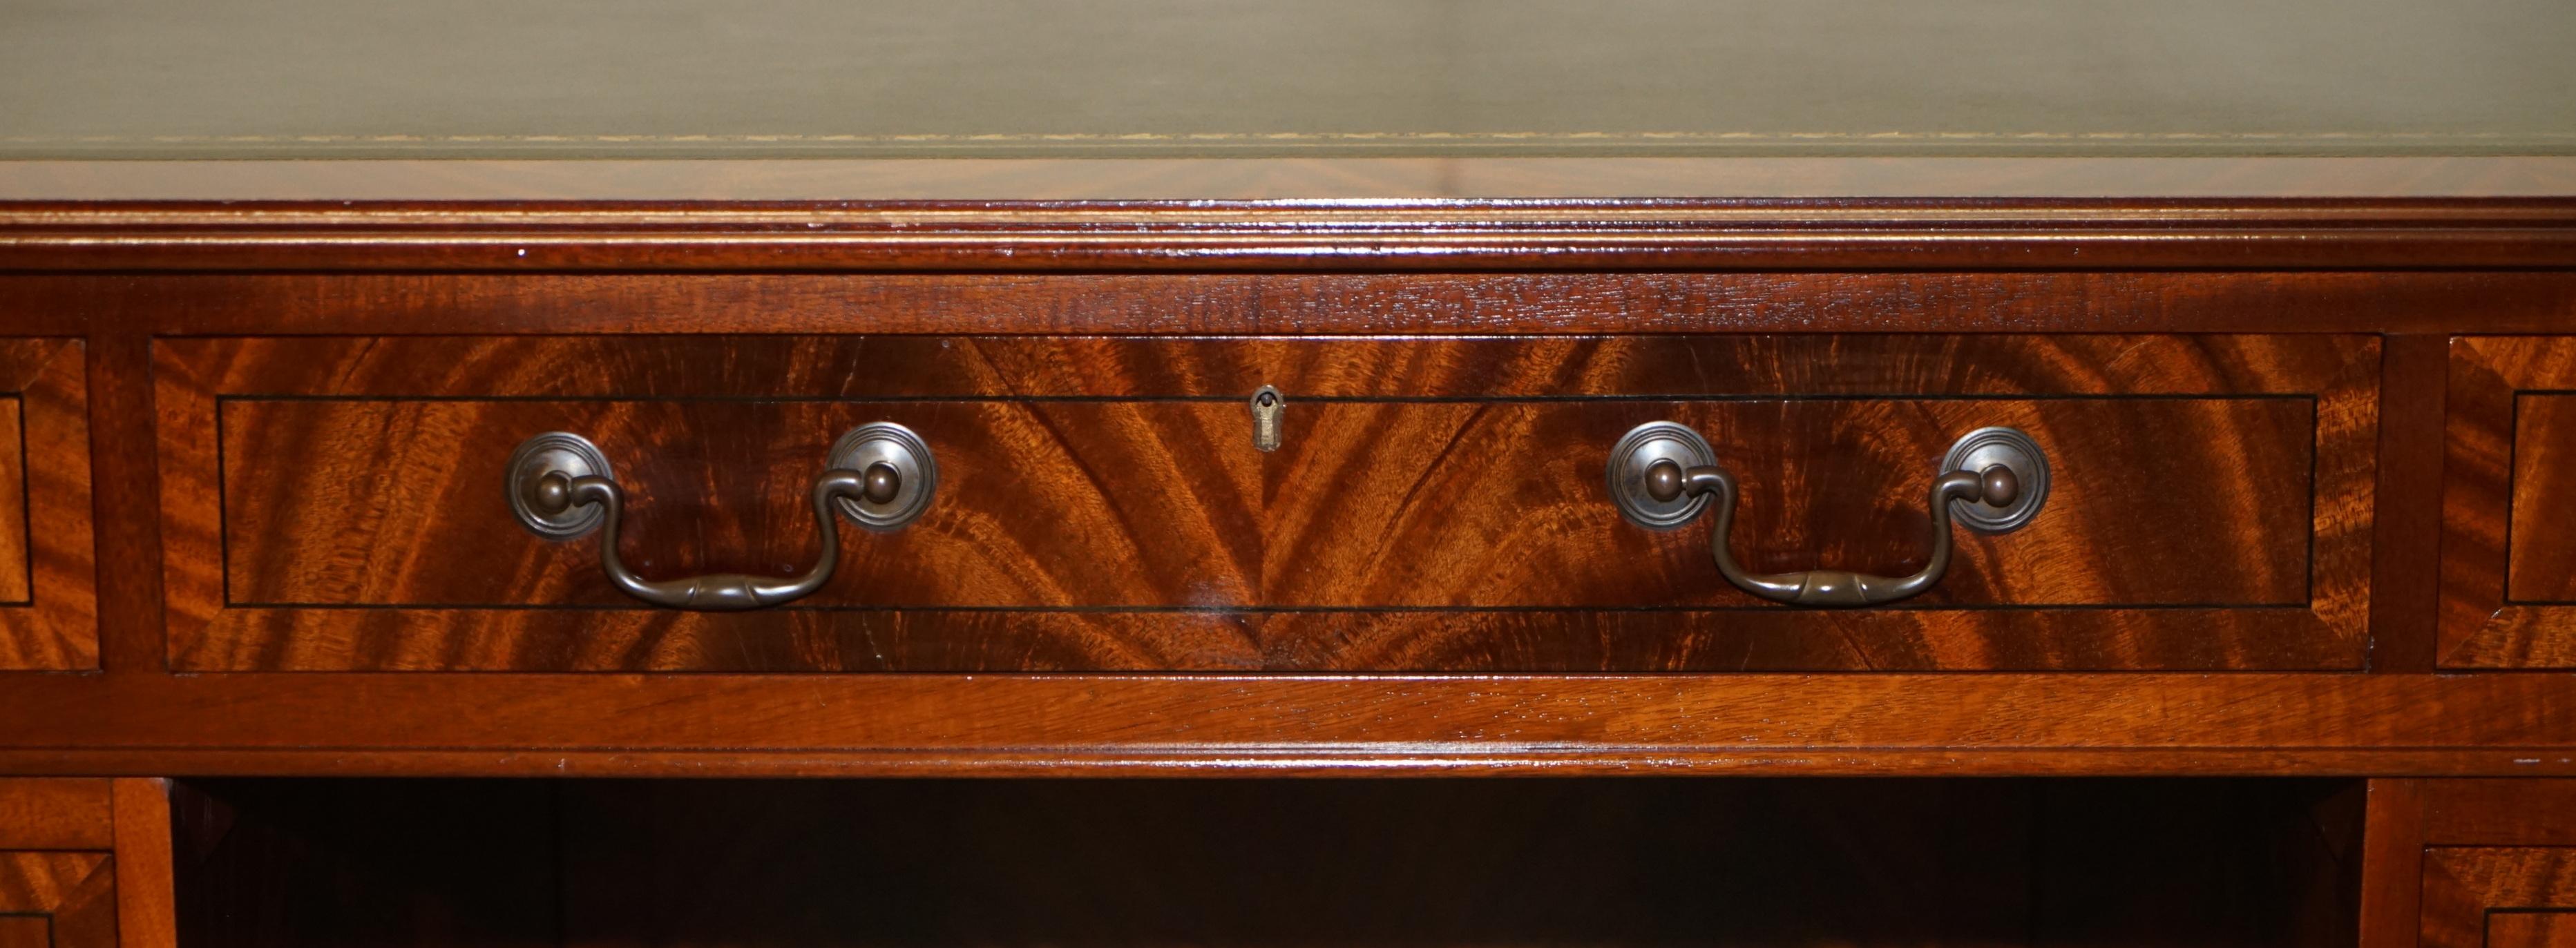 Leather ANTIQUE FLAMED HARDWOOD DESK FROM PRINCESS DIANA'S FAMiLY HOME SPENCER HOUSE For Sale